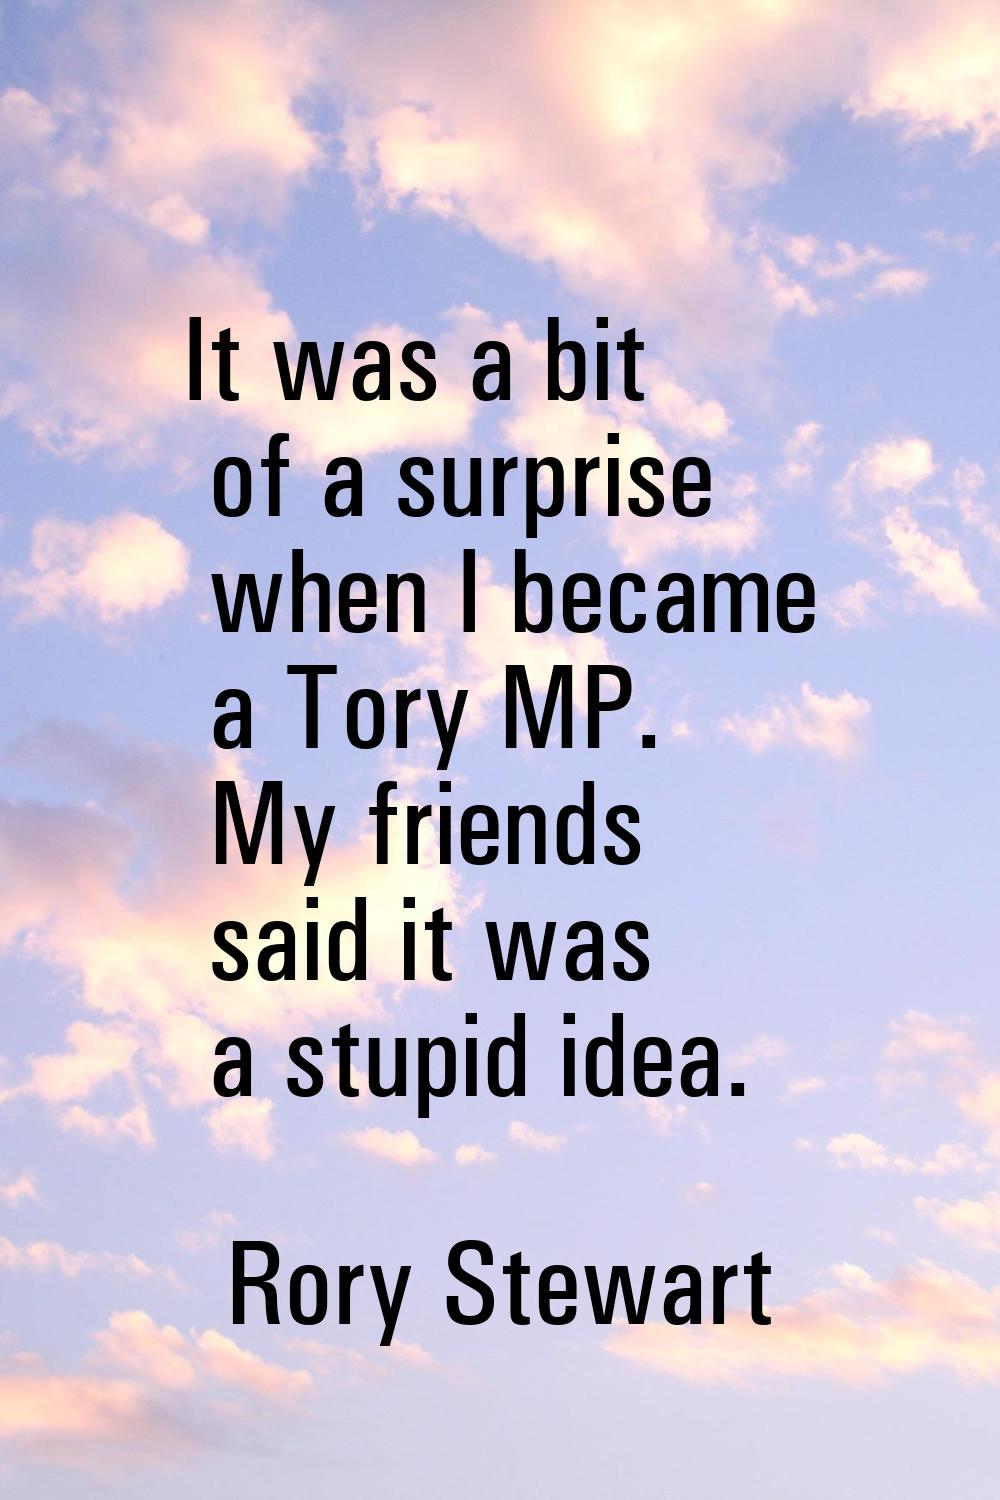 It was a bit of a surprise when I became a Tory MP. My friends said it was a stupid idea.